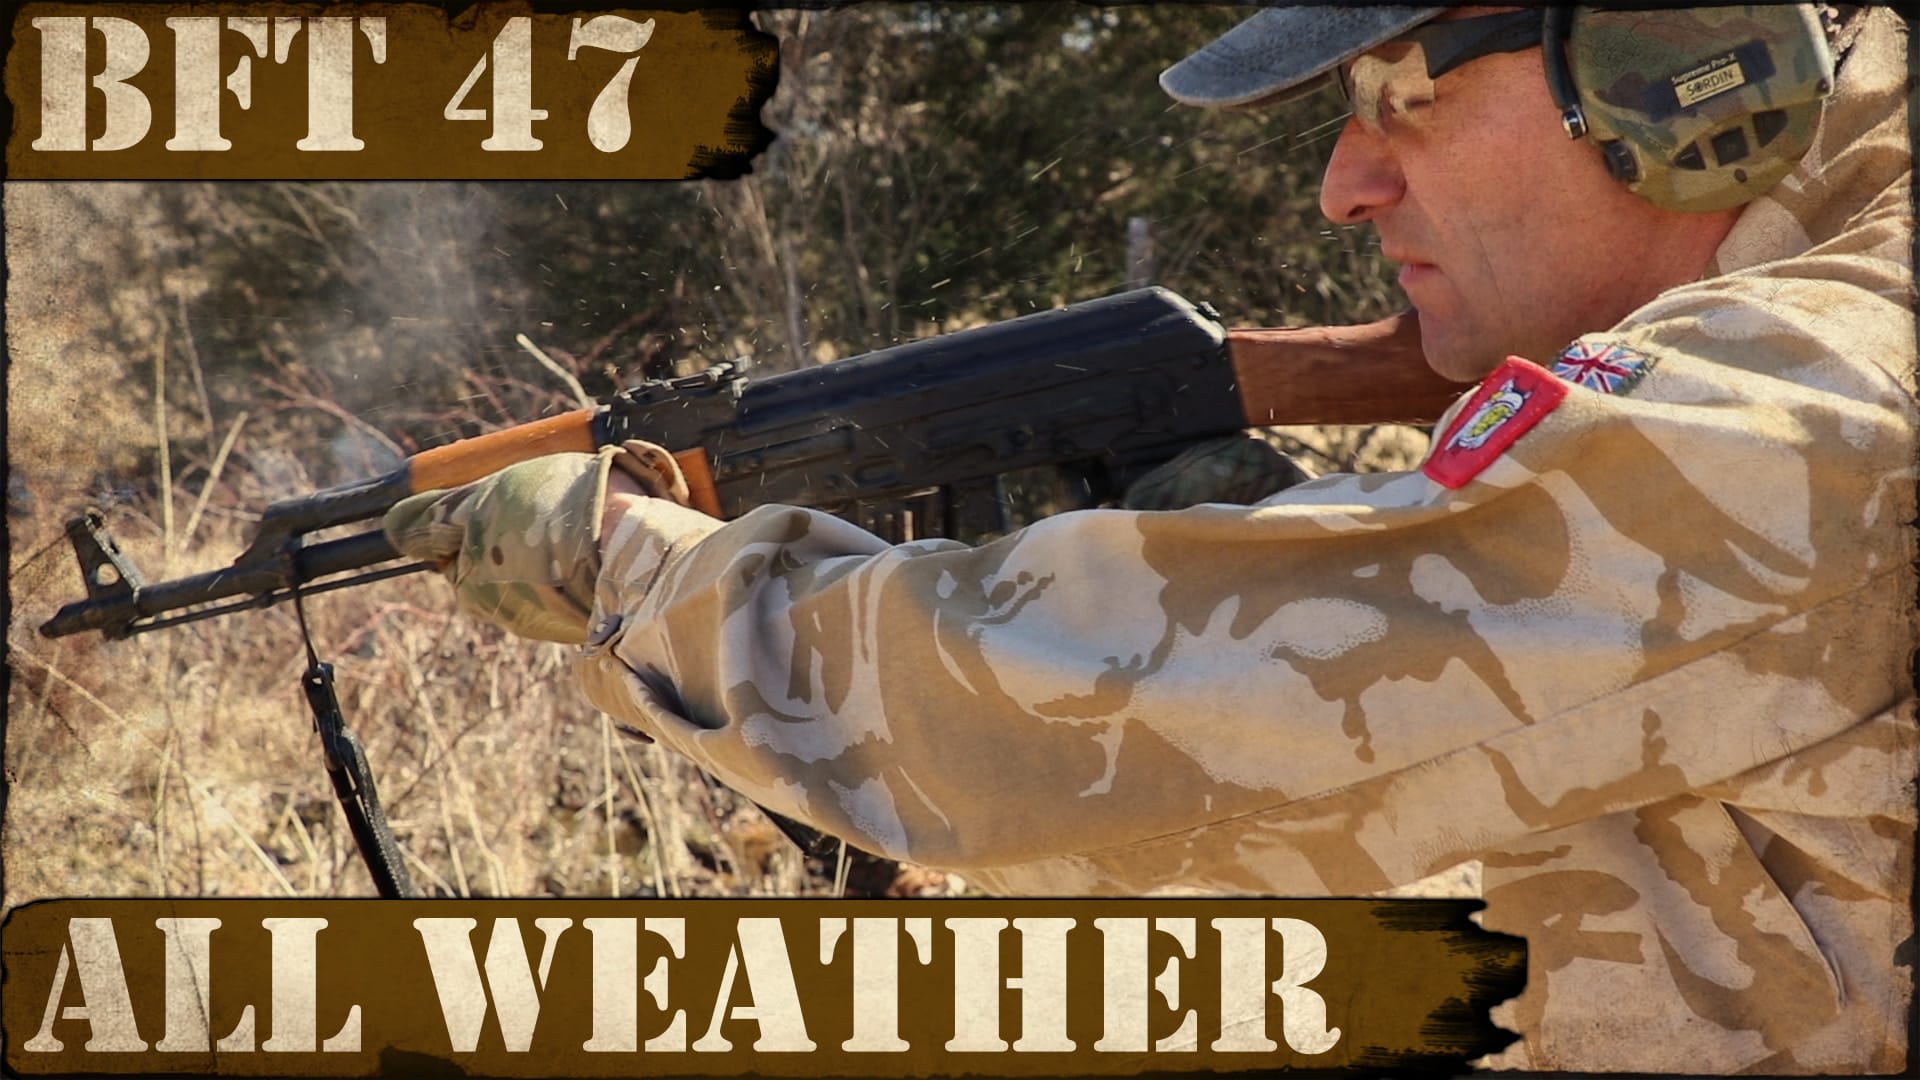 BFT47 – All Weather!